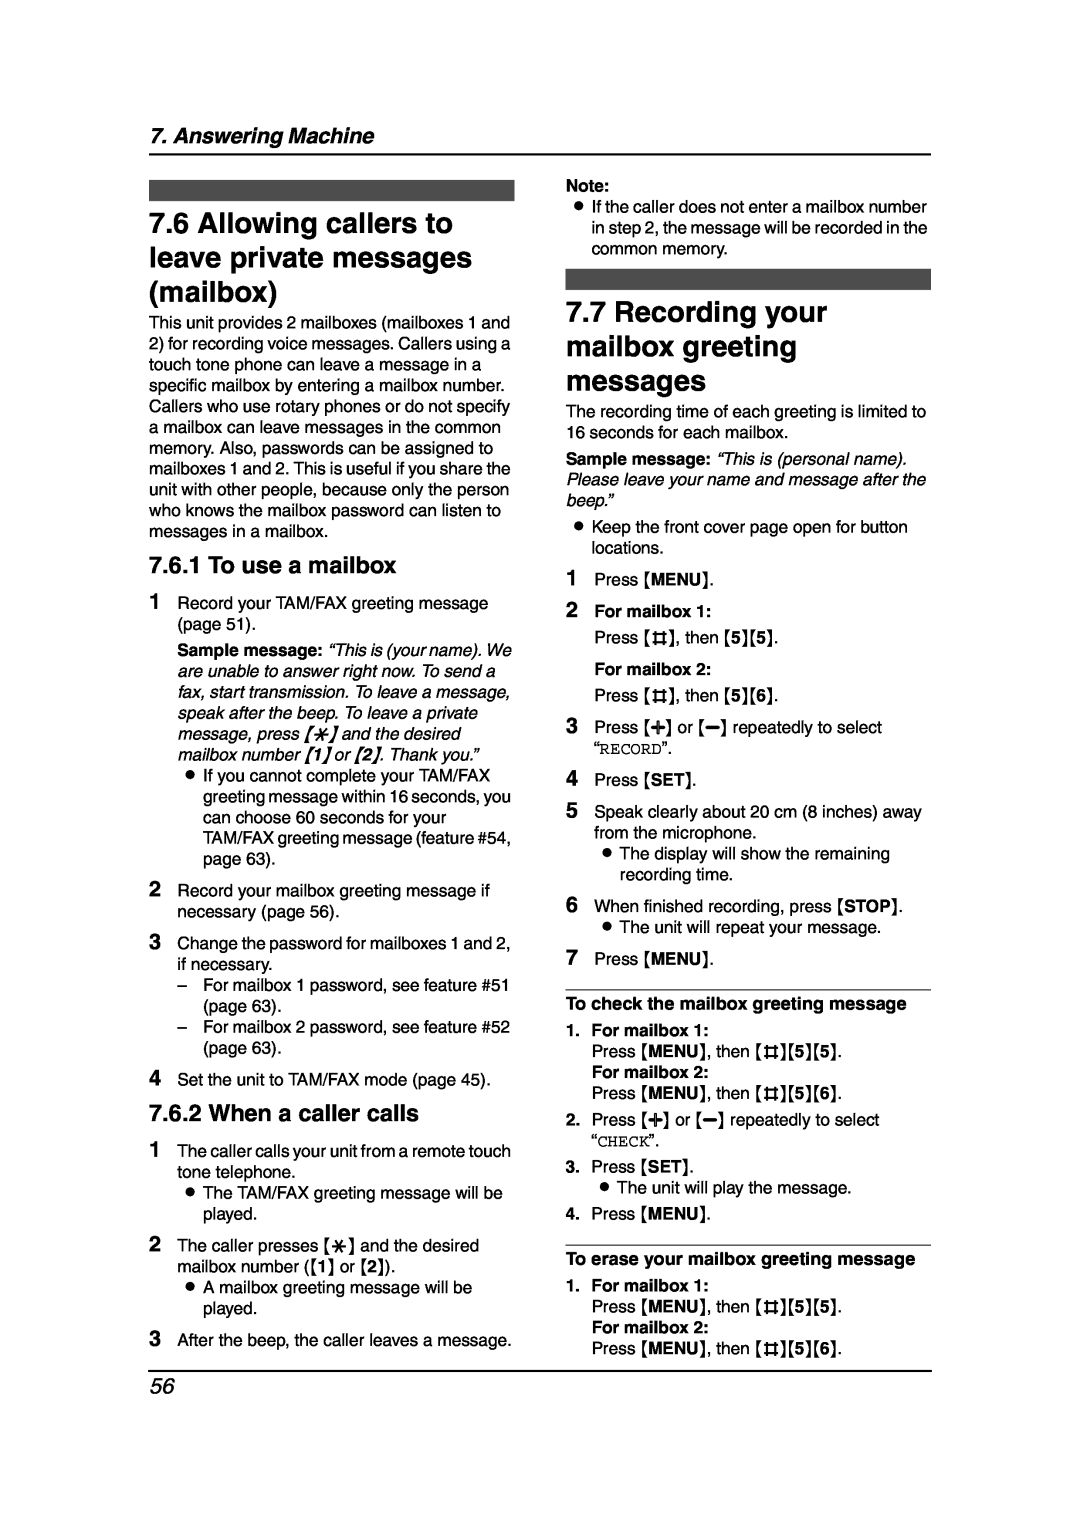 Panasonic KX-FPG376 manual Allowing callers to leave private messages mailbox, Recording your mailbox greeting messages 